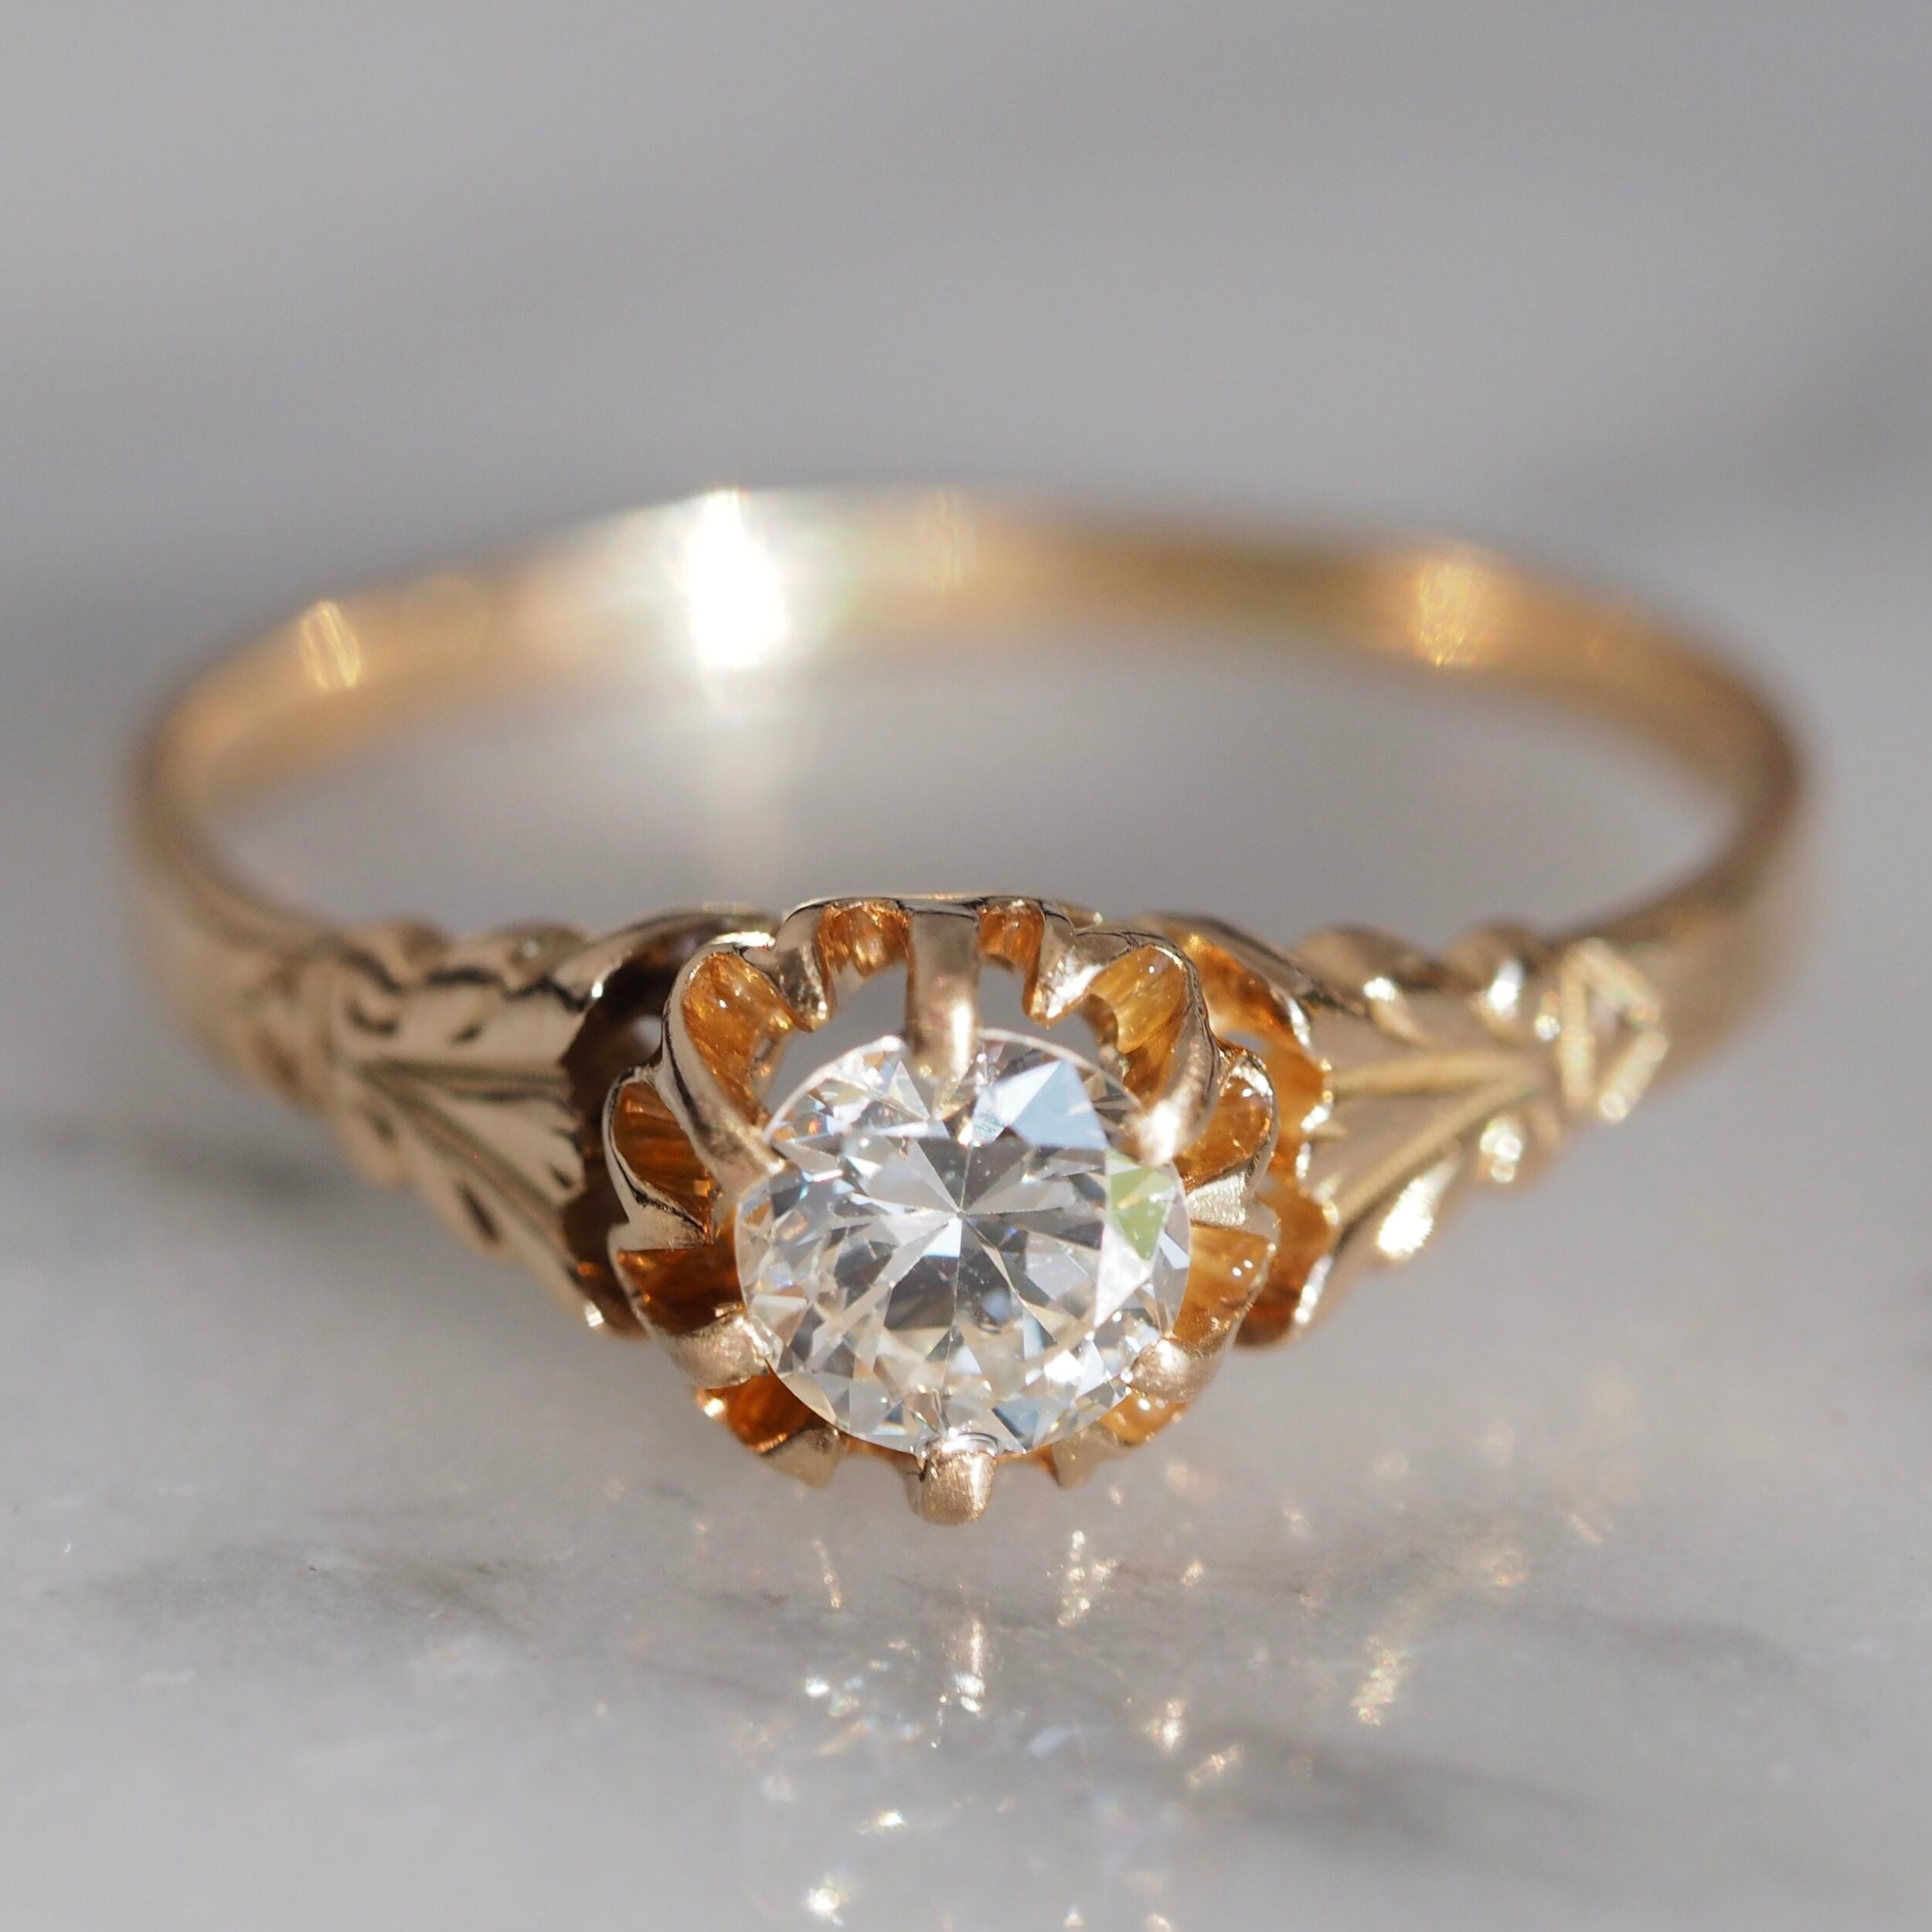 Vintage Engagement Rings | Buy Yours Online Today!